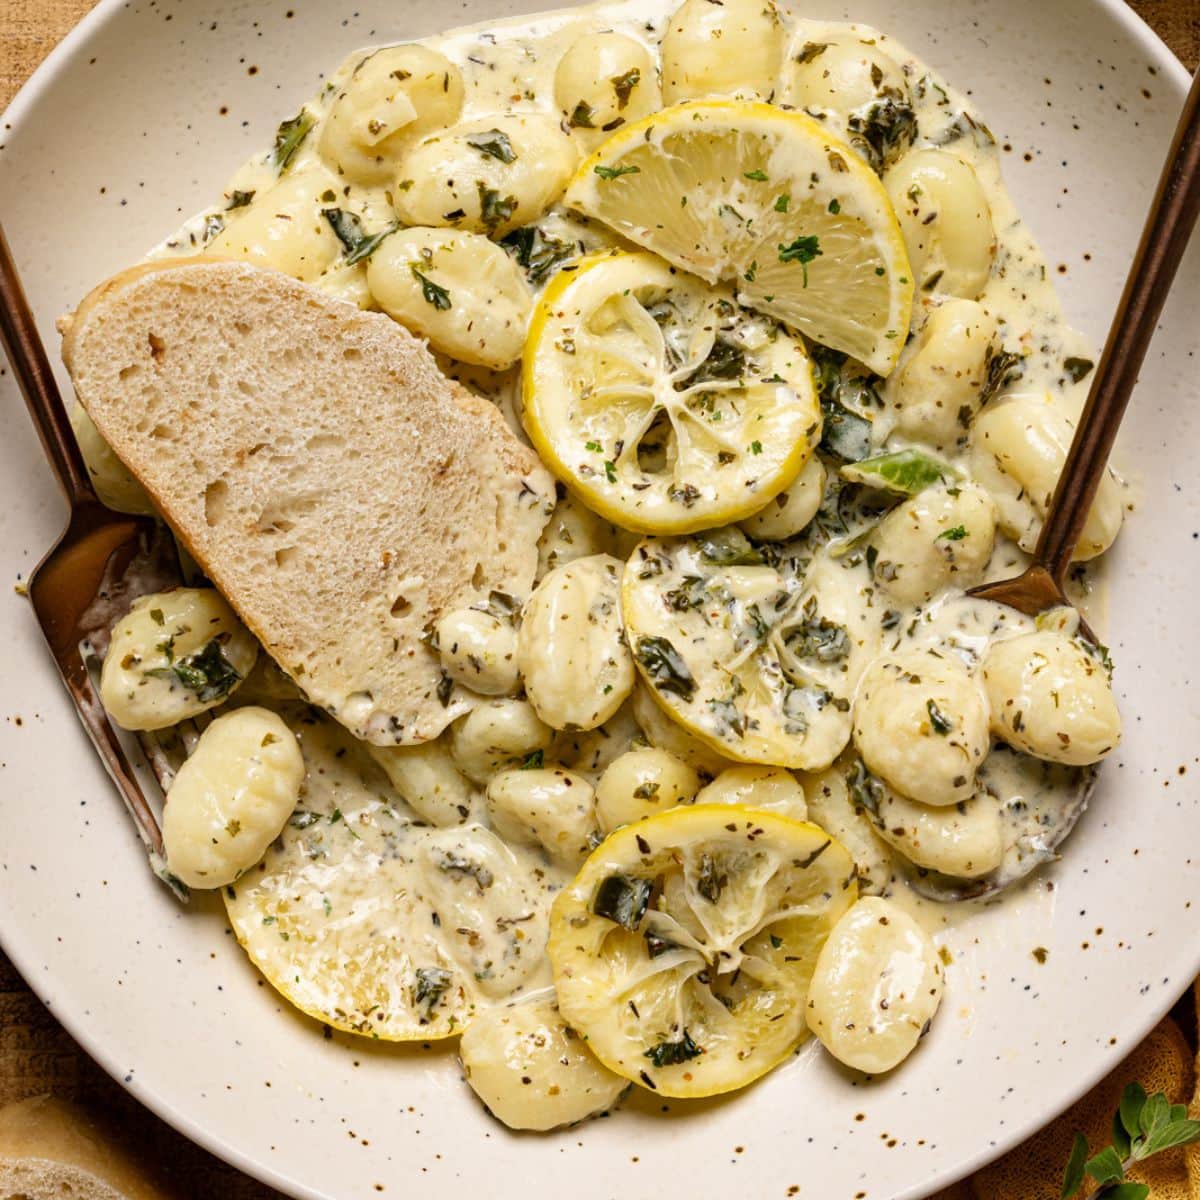 Gnocchi in a plate with a slice of bread, lemon slices, and a spoon + fork.